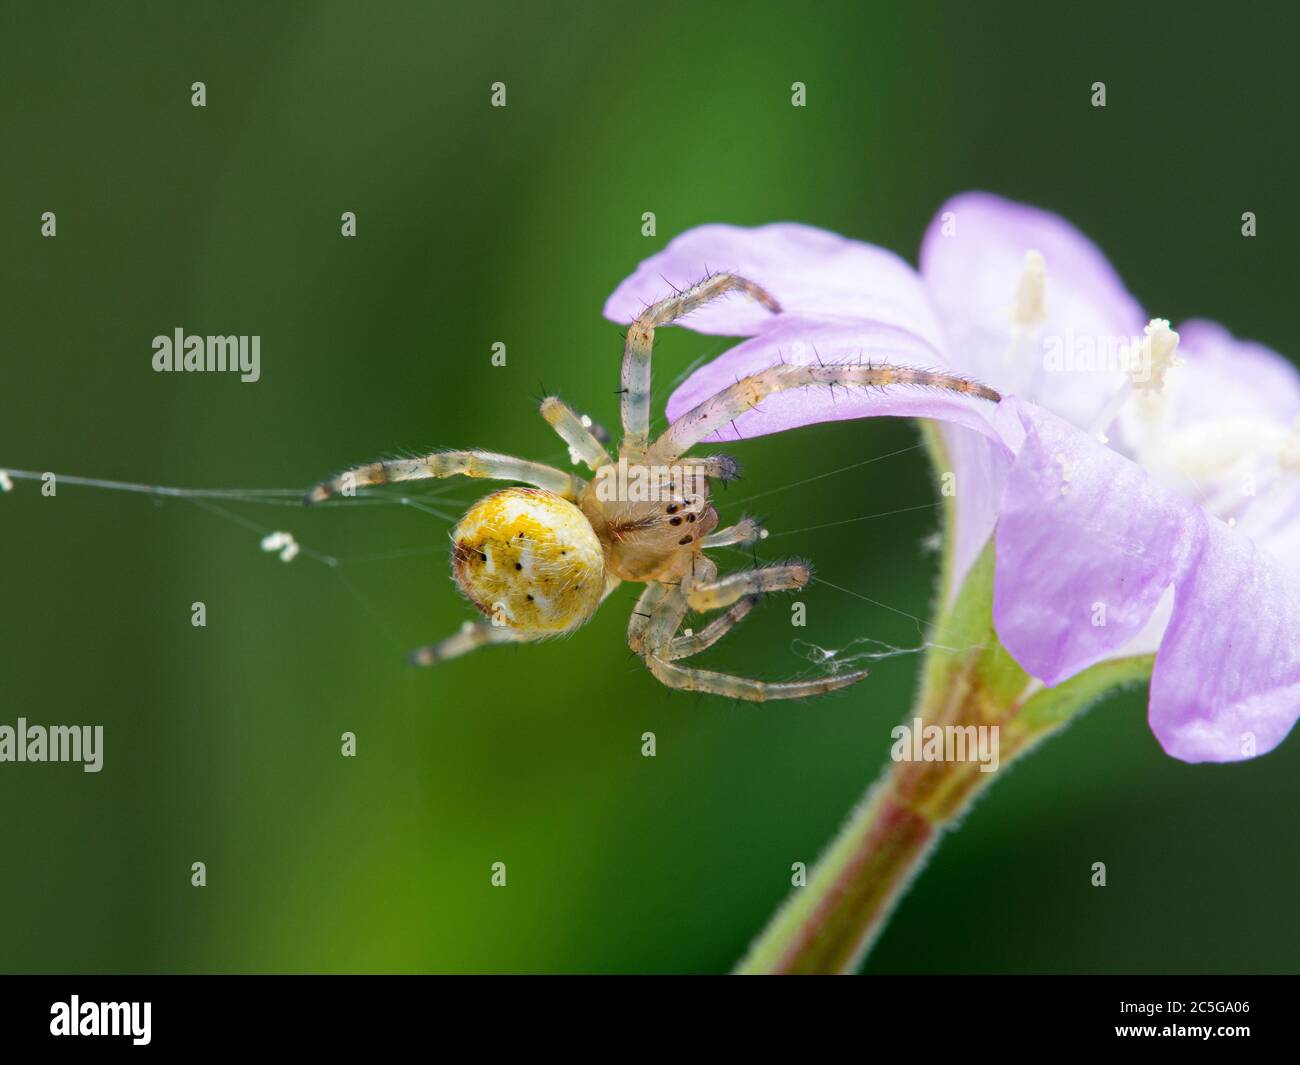 close-up of a tiny orbweaver spider building a web under a flower. Boundary Bay salt marsh, British Columbia Stock Photo